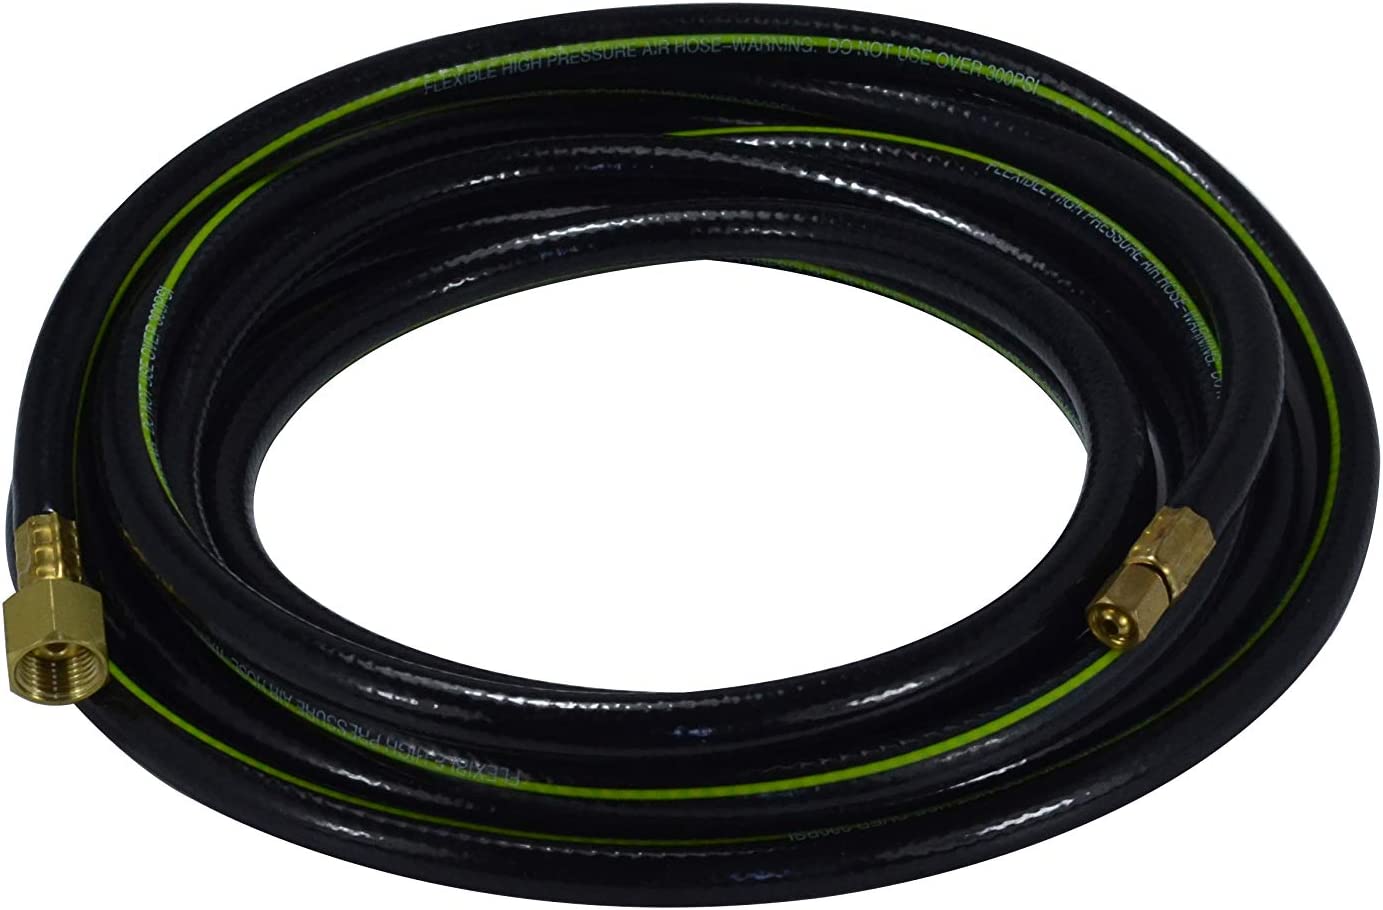 Power Cable Hose for SG-51 Plasma Cutter Torch 12" Feet Wire 5mm2 Connector 3/8-24 Inside M16x1.5 (SG-51 12")